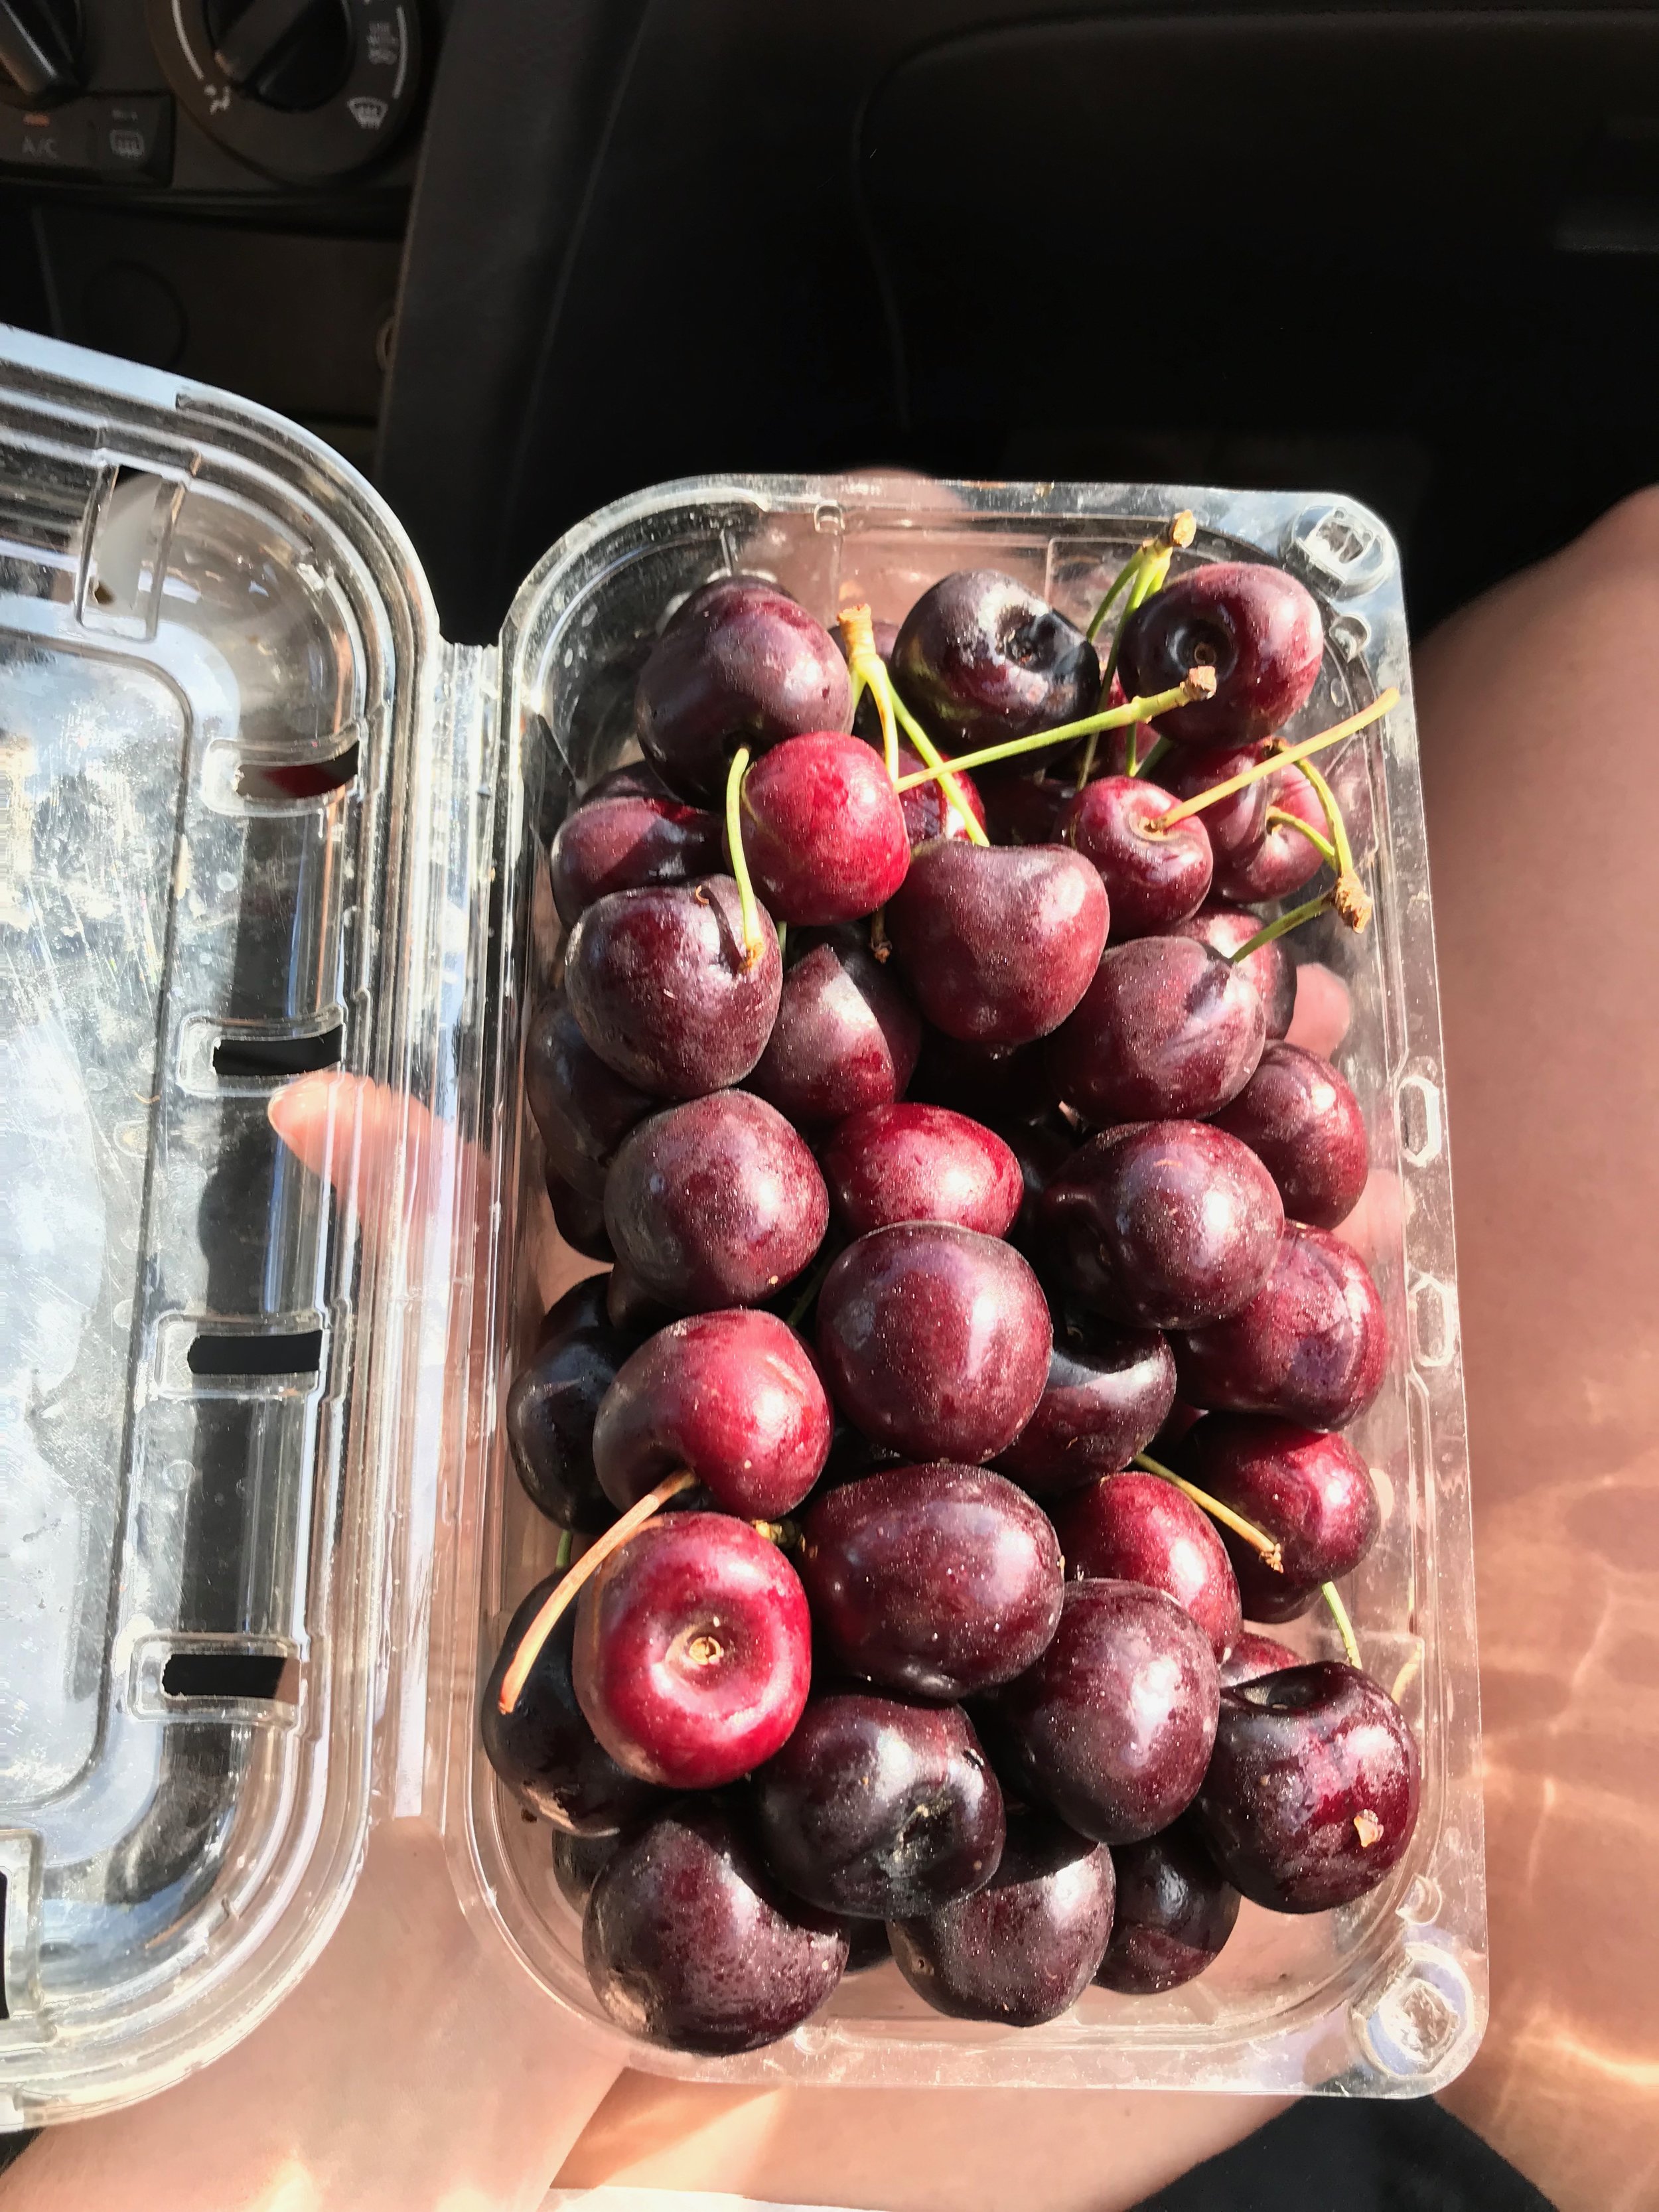 Cherries from Chile